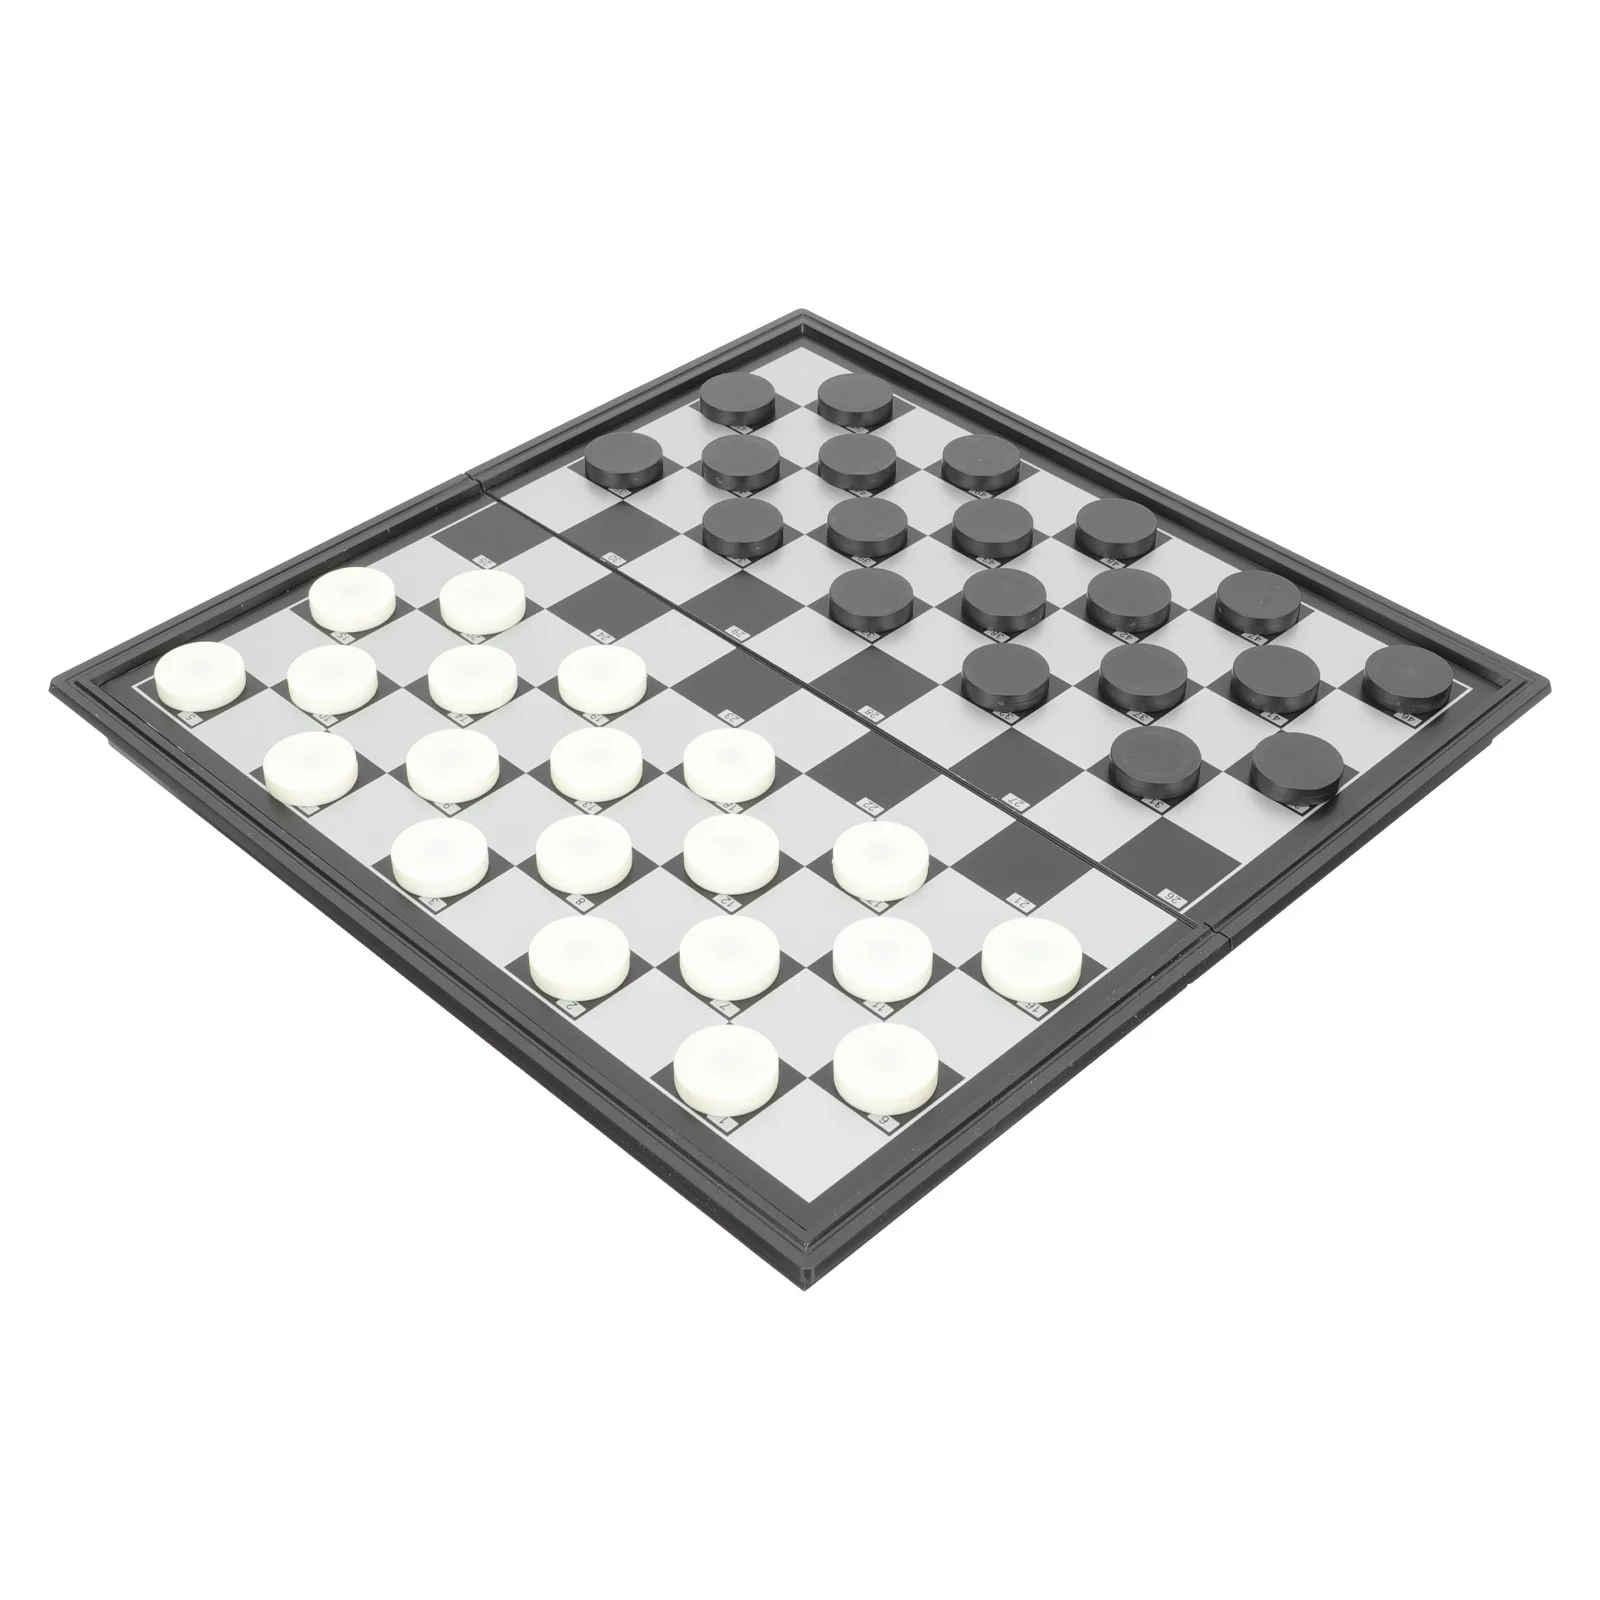 

Magnetic Toys Checkers Classic Board Game Portable 25x25cm Trainer Hips High Impact Plastic Chess Sets Travel